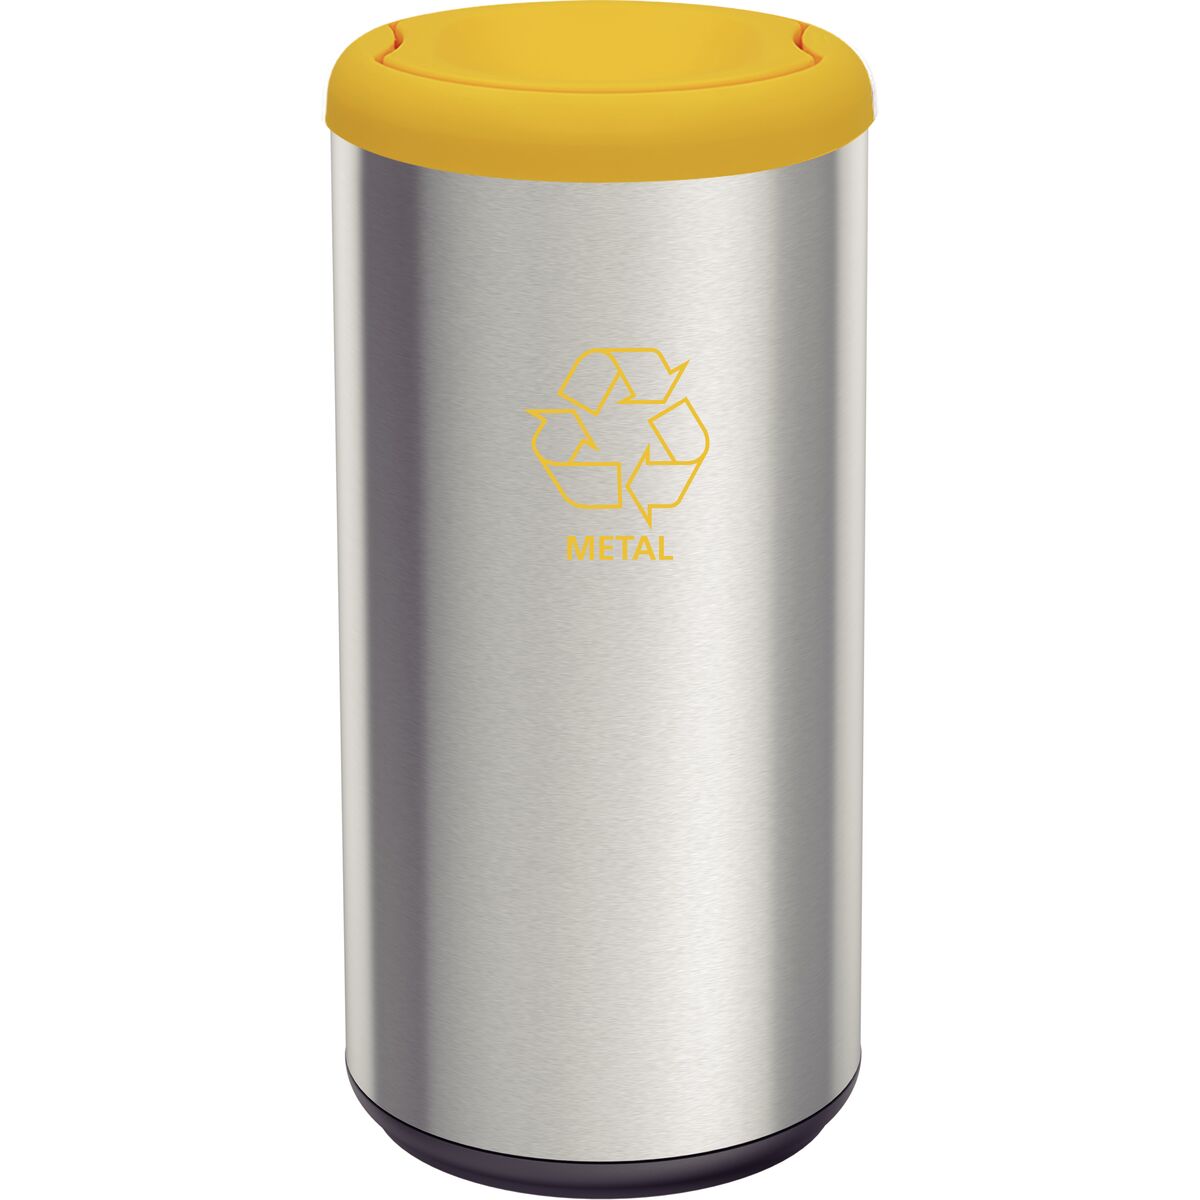 Tramontina 40L stainless steel Piemonte swing bin with a Scotch Brite finish, with a yellow polypropylene lid